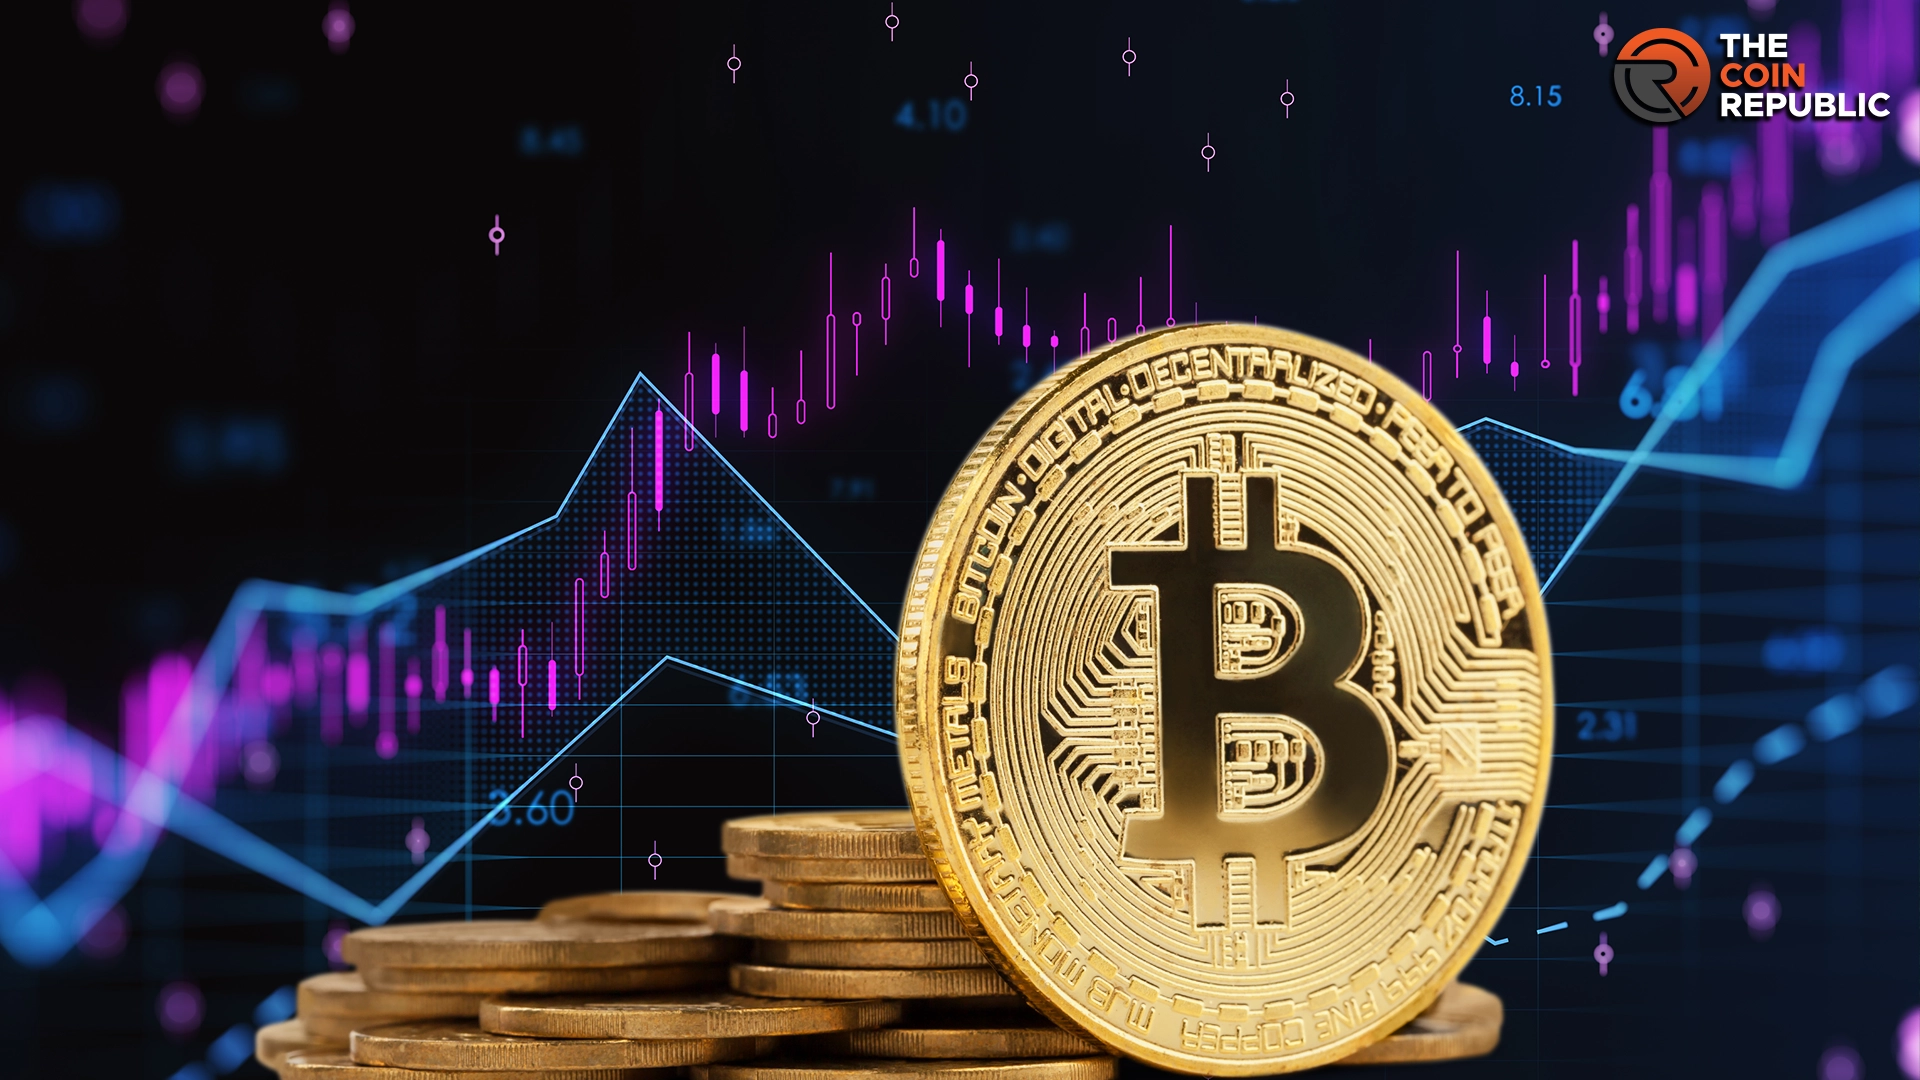 Bitcoin Price Prediction: Will The Escalating Tension In The Middle East Undermine Halving?